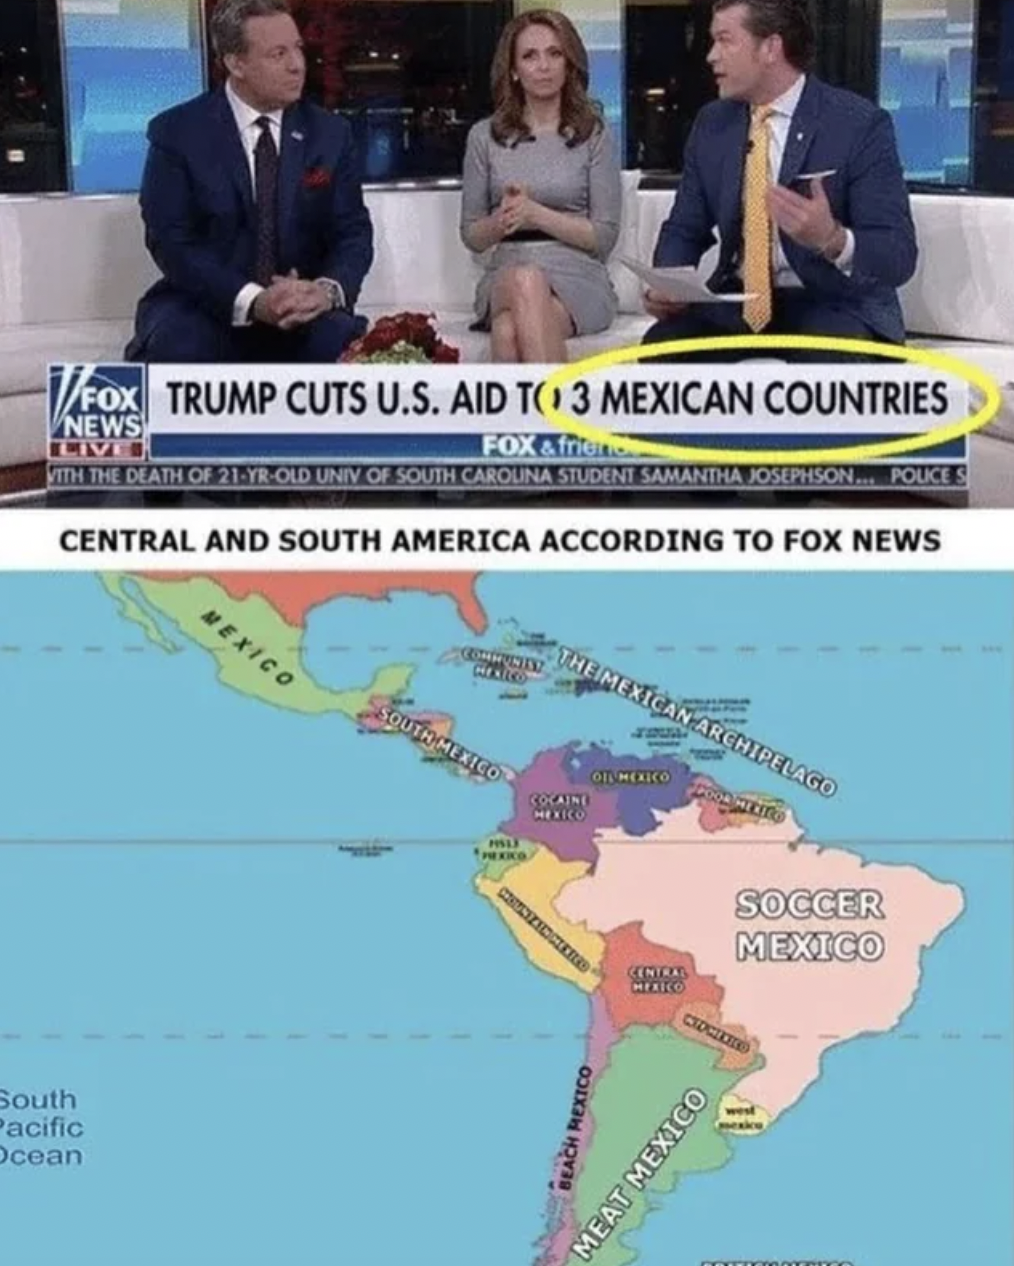 funny facepalms - central and south america according to fox news - Fox Trump Cuts U.S. Aid To 3 Mexican Countries News Live Fox A With The Death Of 21YrOld Univ Of South Carolina Student